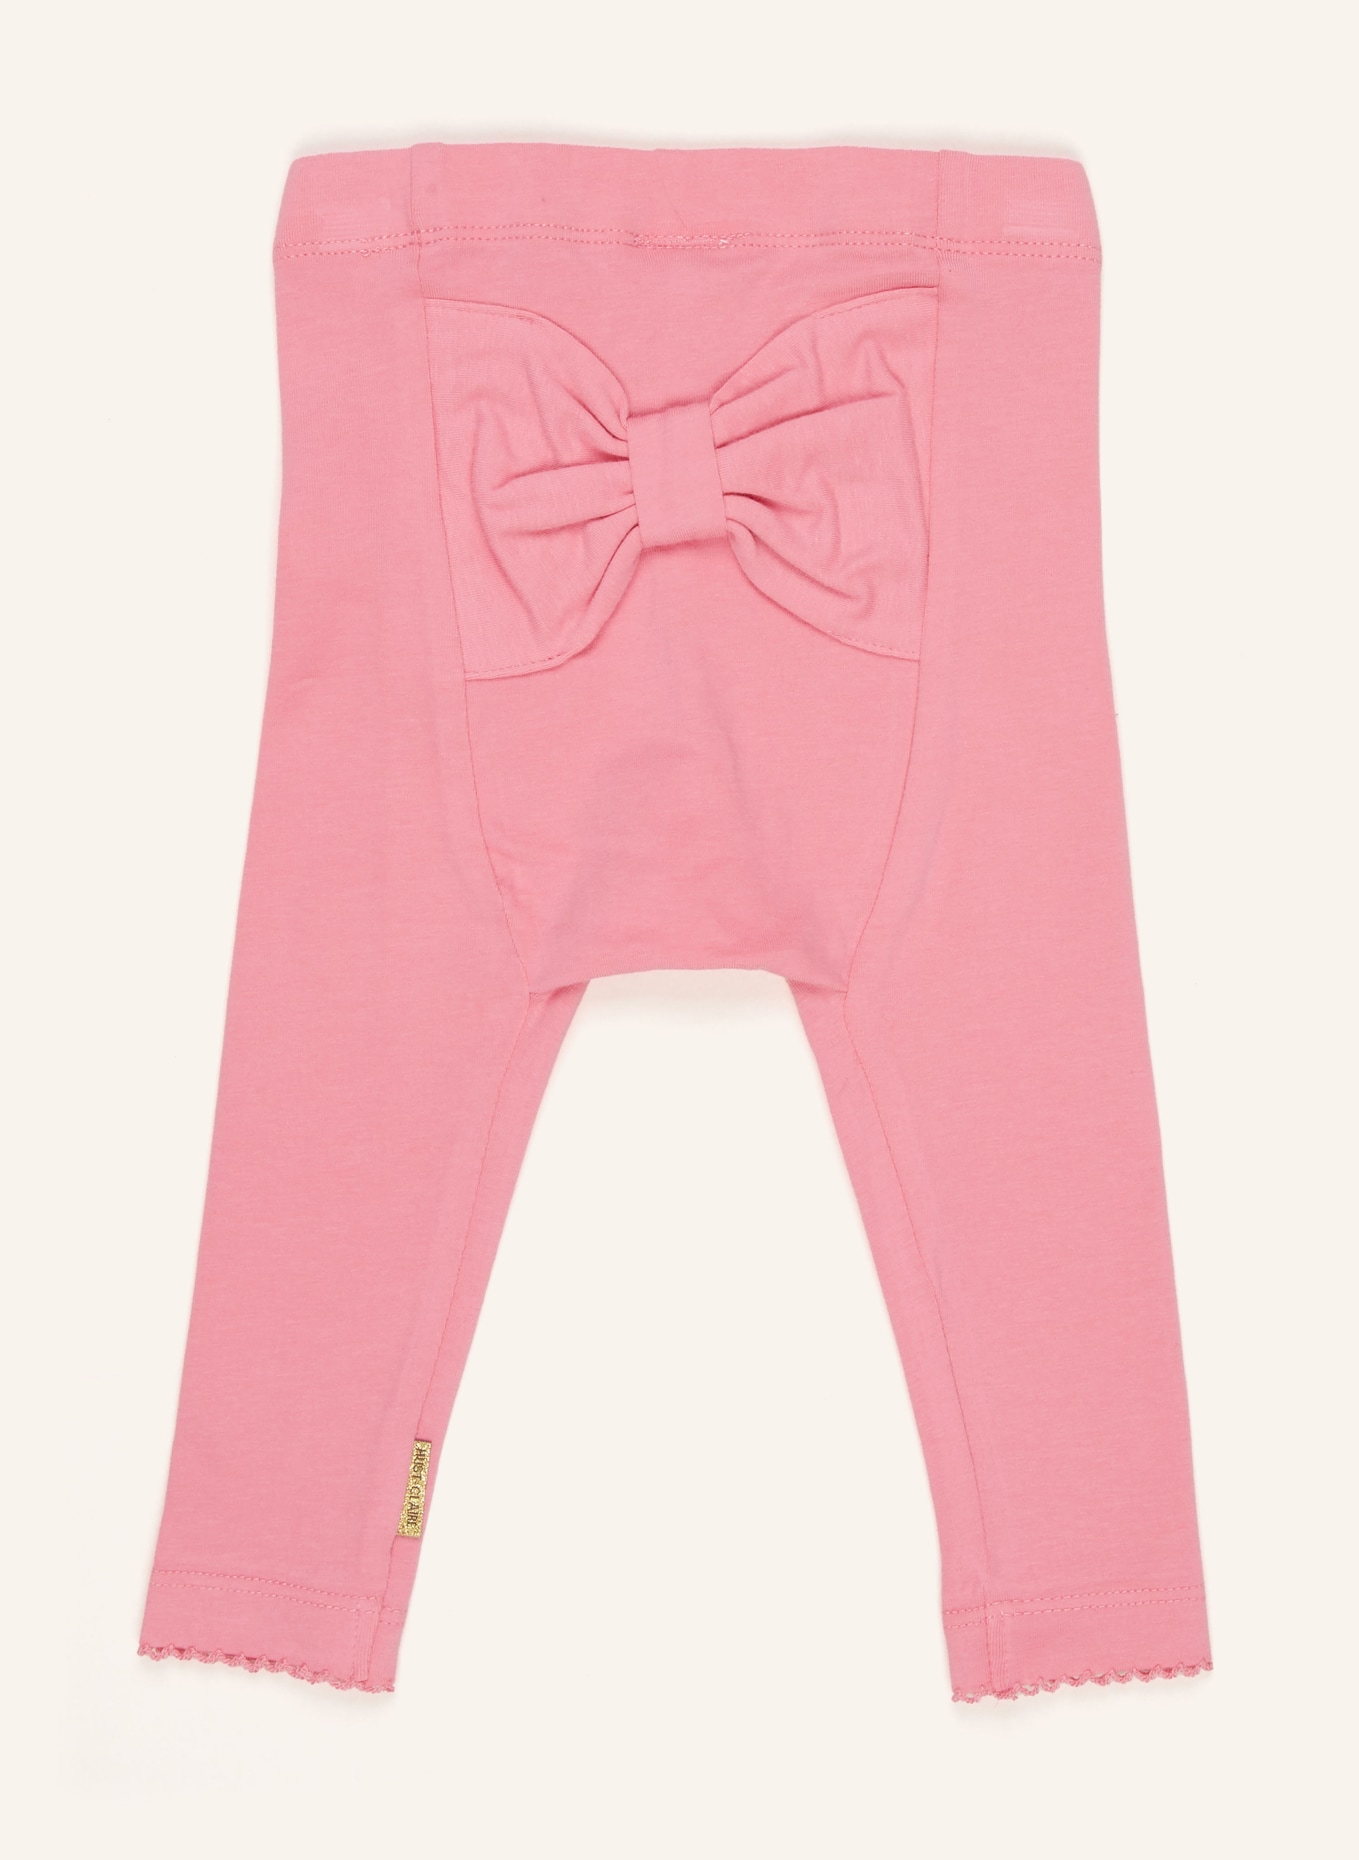 HUST and CLAIRE Leggings LALINE, Farbe: PINK (Bild 2)